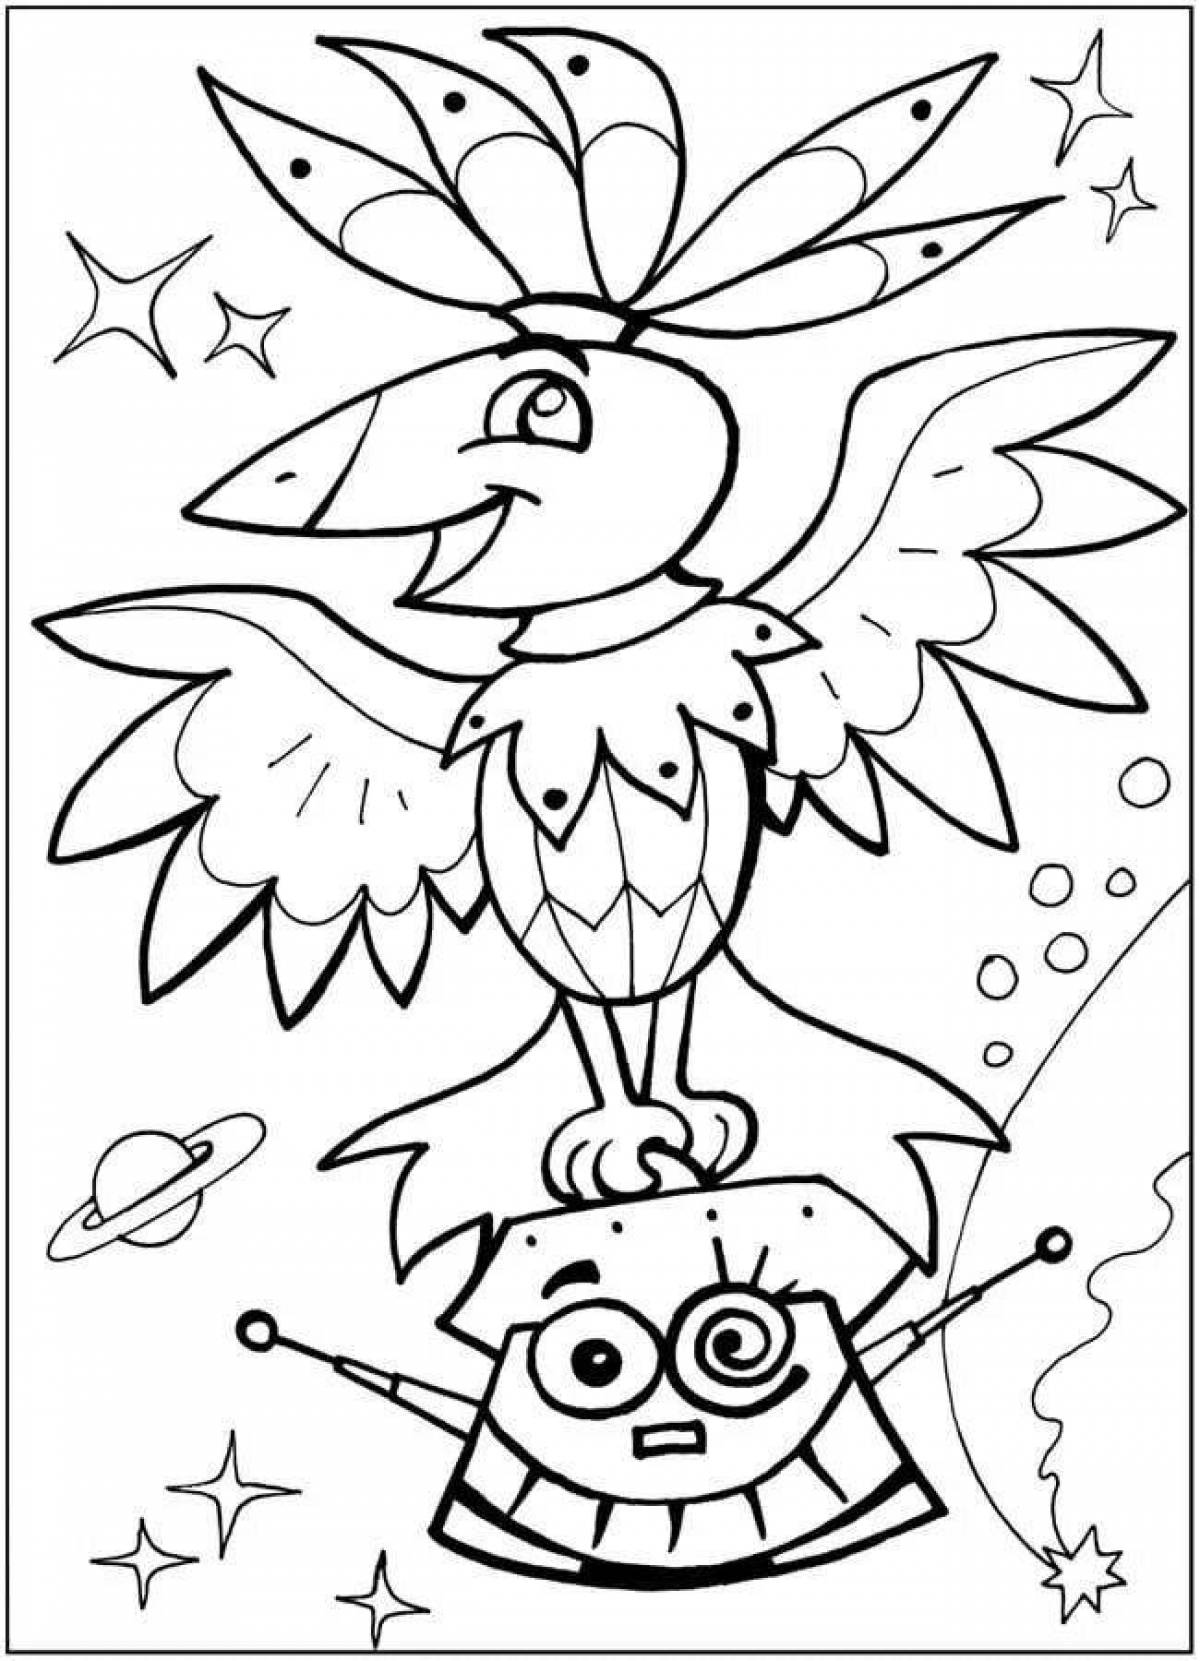 Exciting coloring book the mystery of the third planet